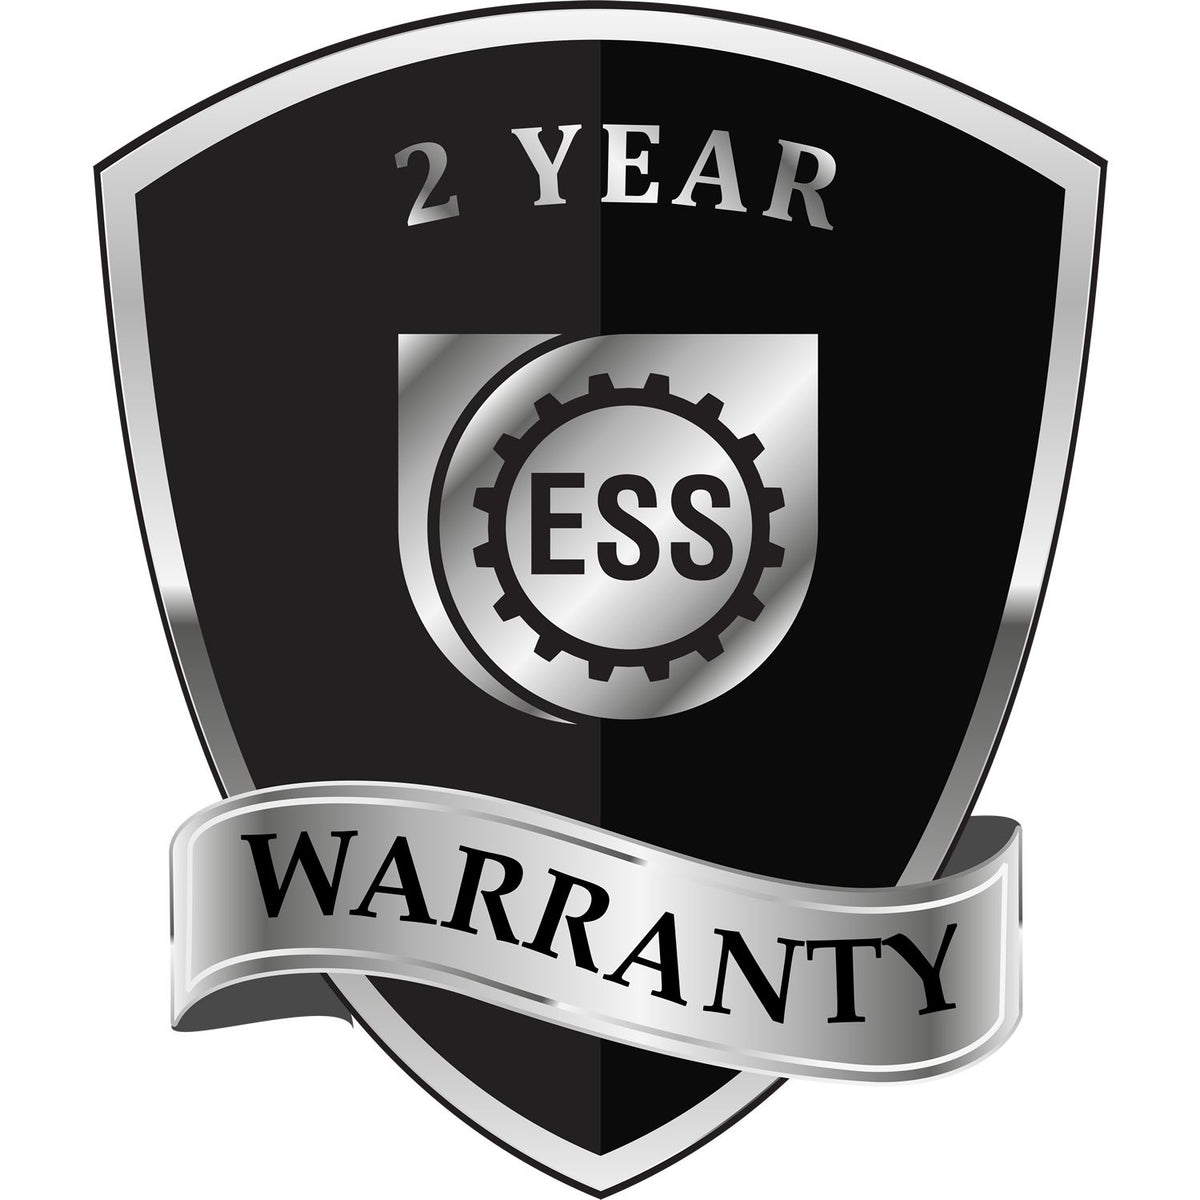 A black and silver badge or emblem showing warranty information for the Hybrid Nevada Architect Seal